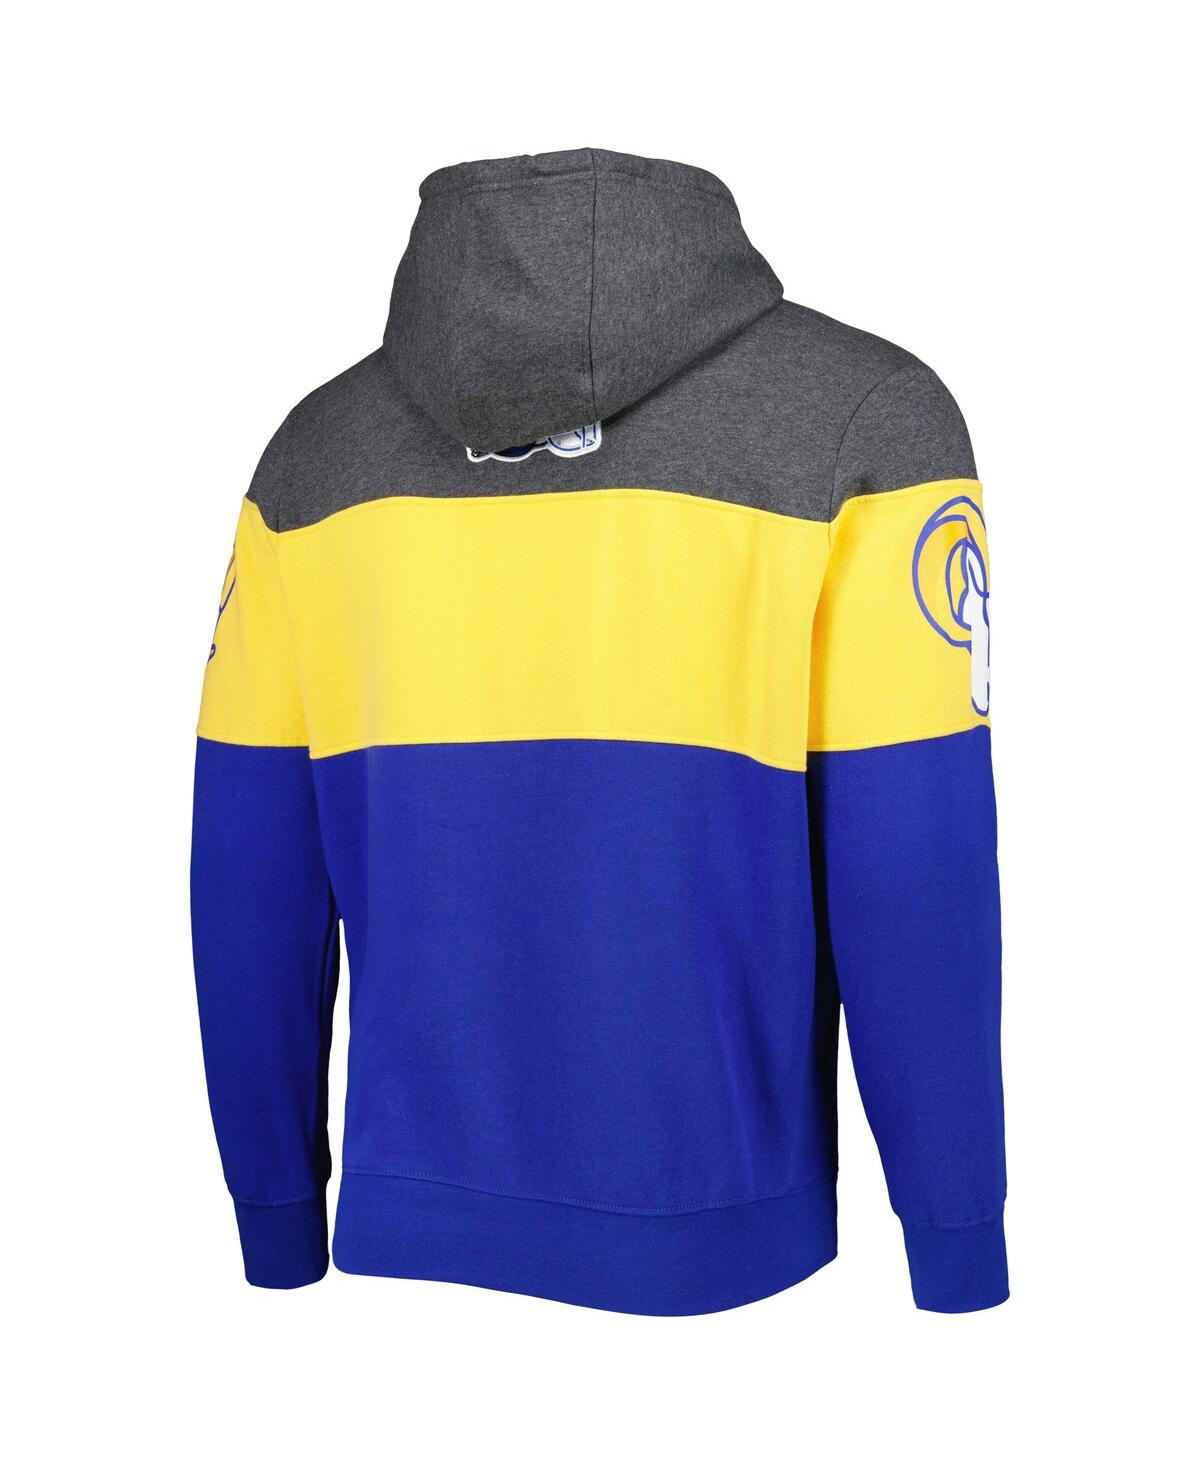 Shop Starter Men's  Heather Charcoal, Royal Los Angeles Rams Extreme Pullover Hoodie In Heather Charcoal,royal